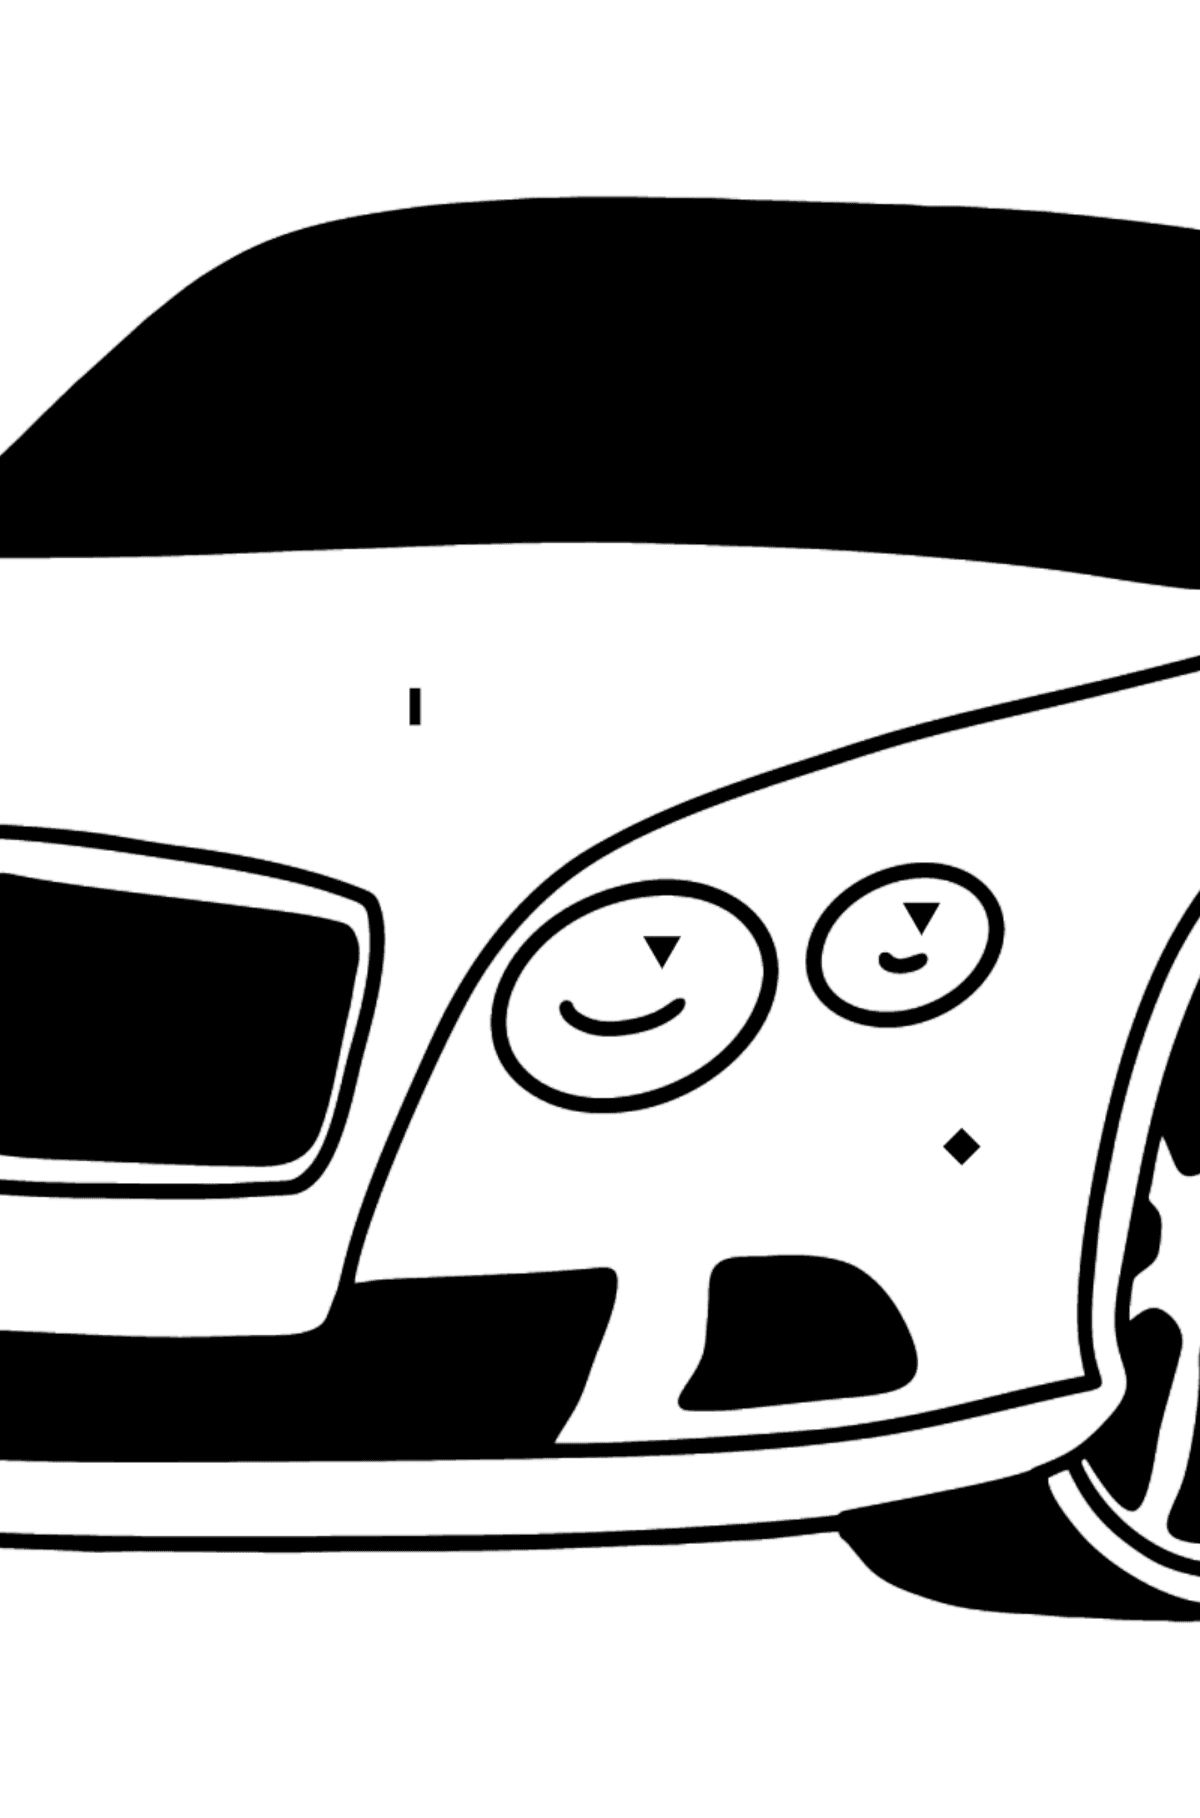 Bentley Continental GT Car coloring page - Coloring by Symbols for Kids